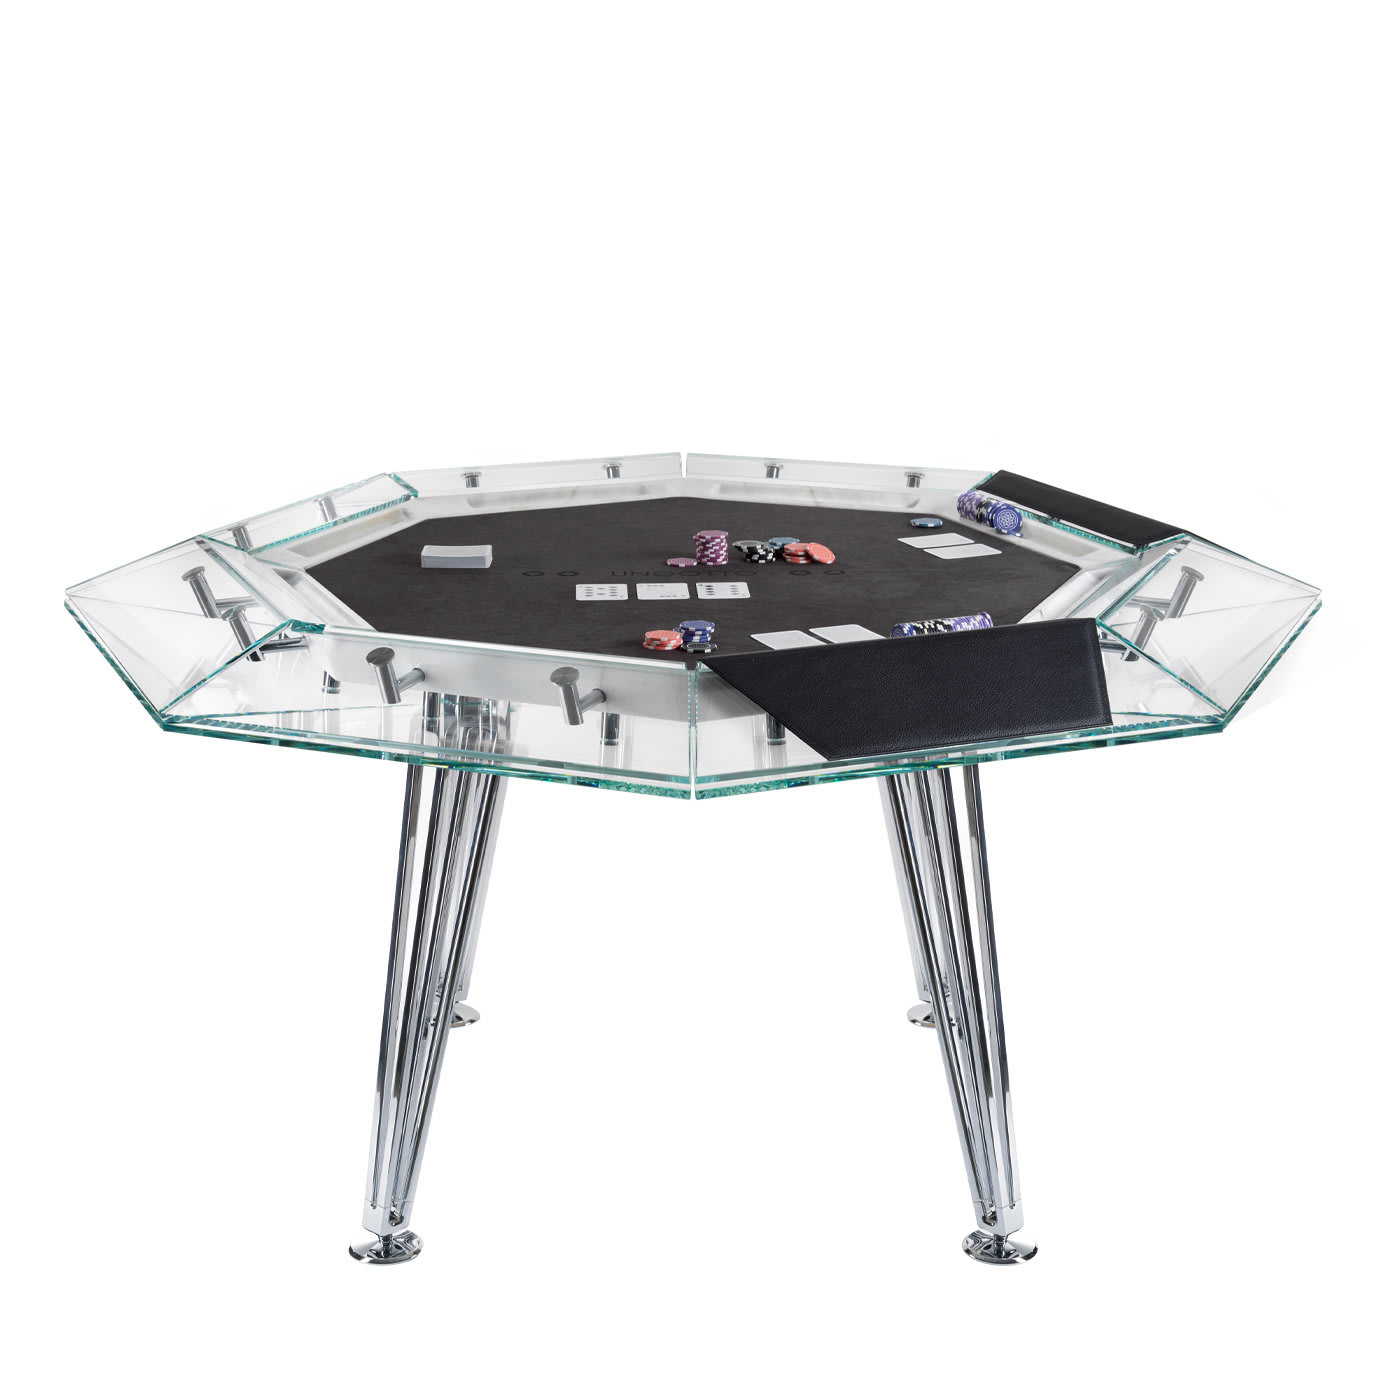 Unootto 8 Player Marble Edition Poker Table - Impatia